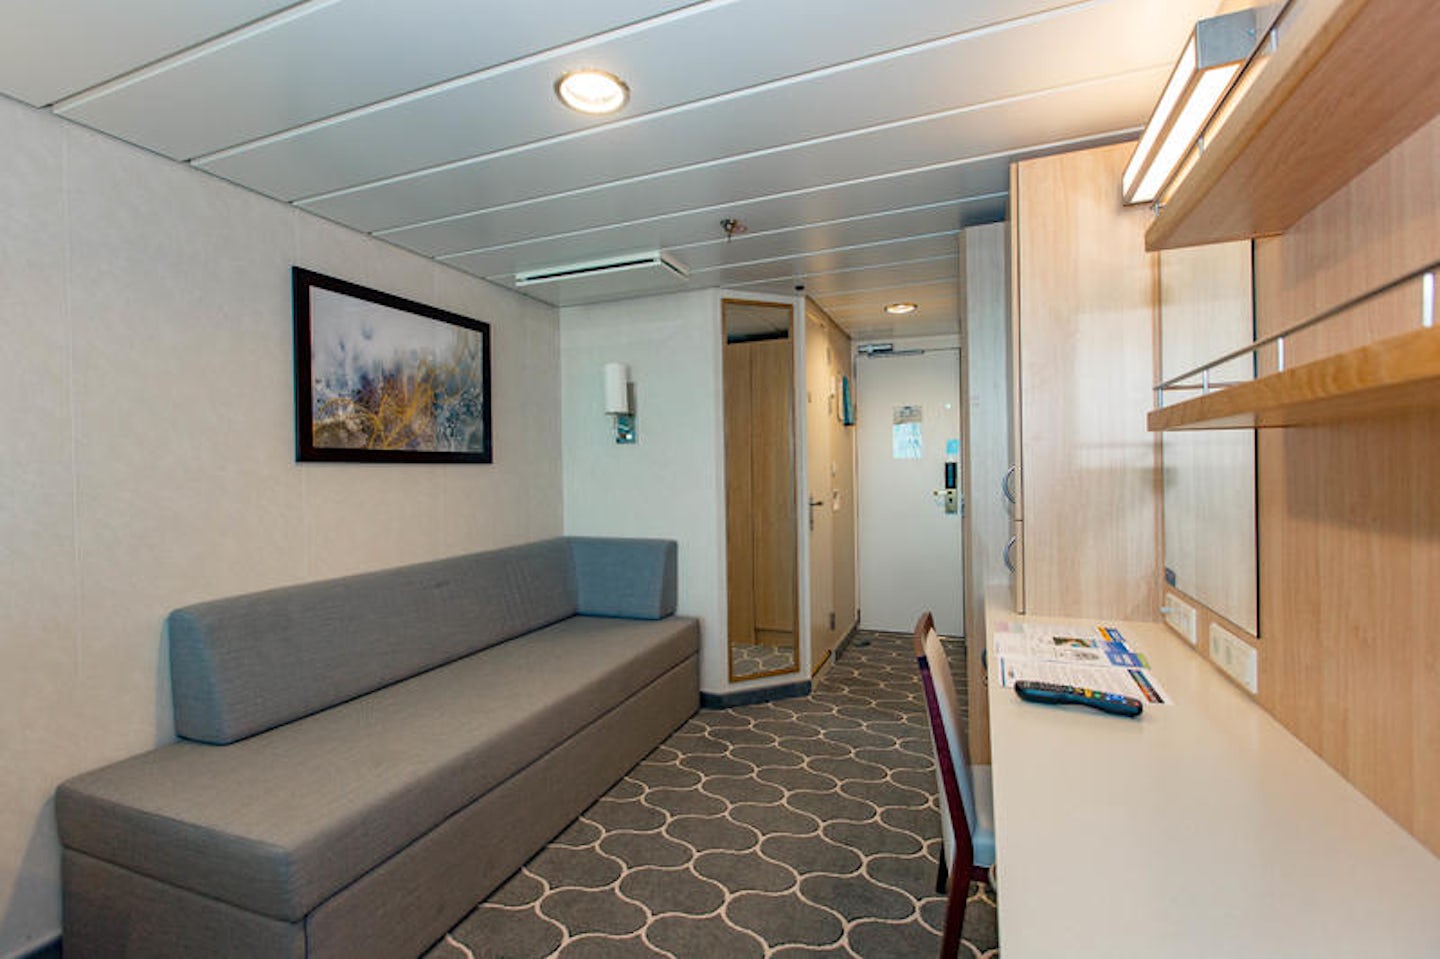 The Spacious Panoramic Ocean-View Cabin on Mariner of the Seas